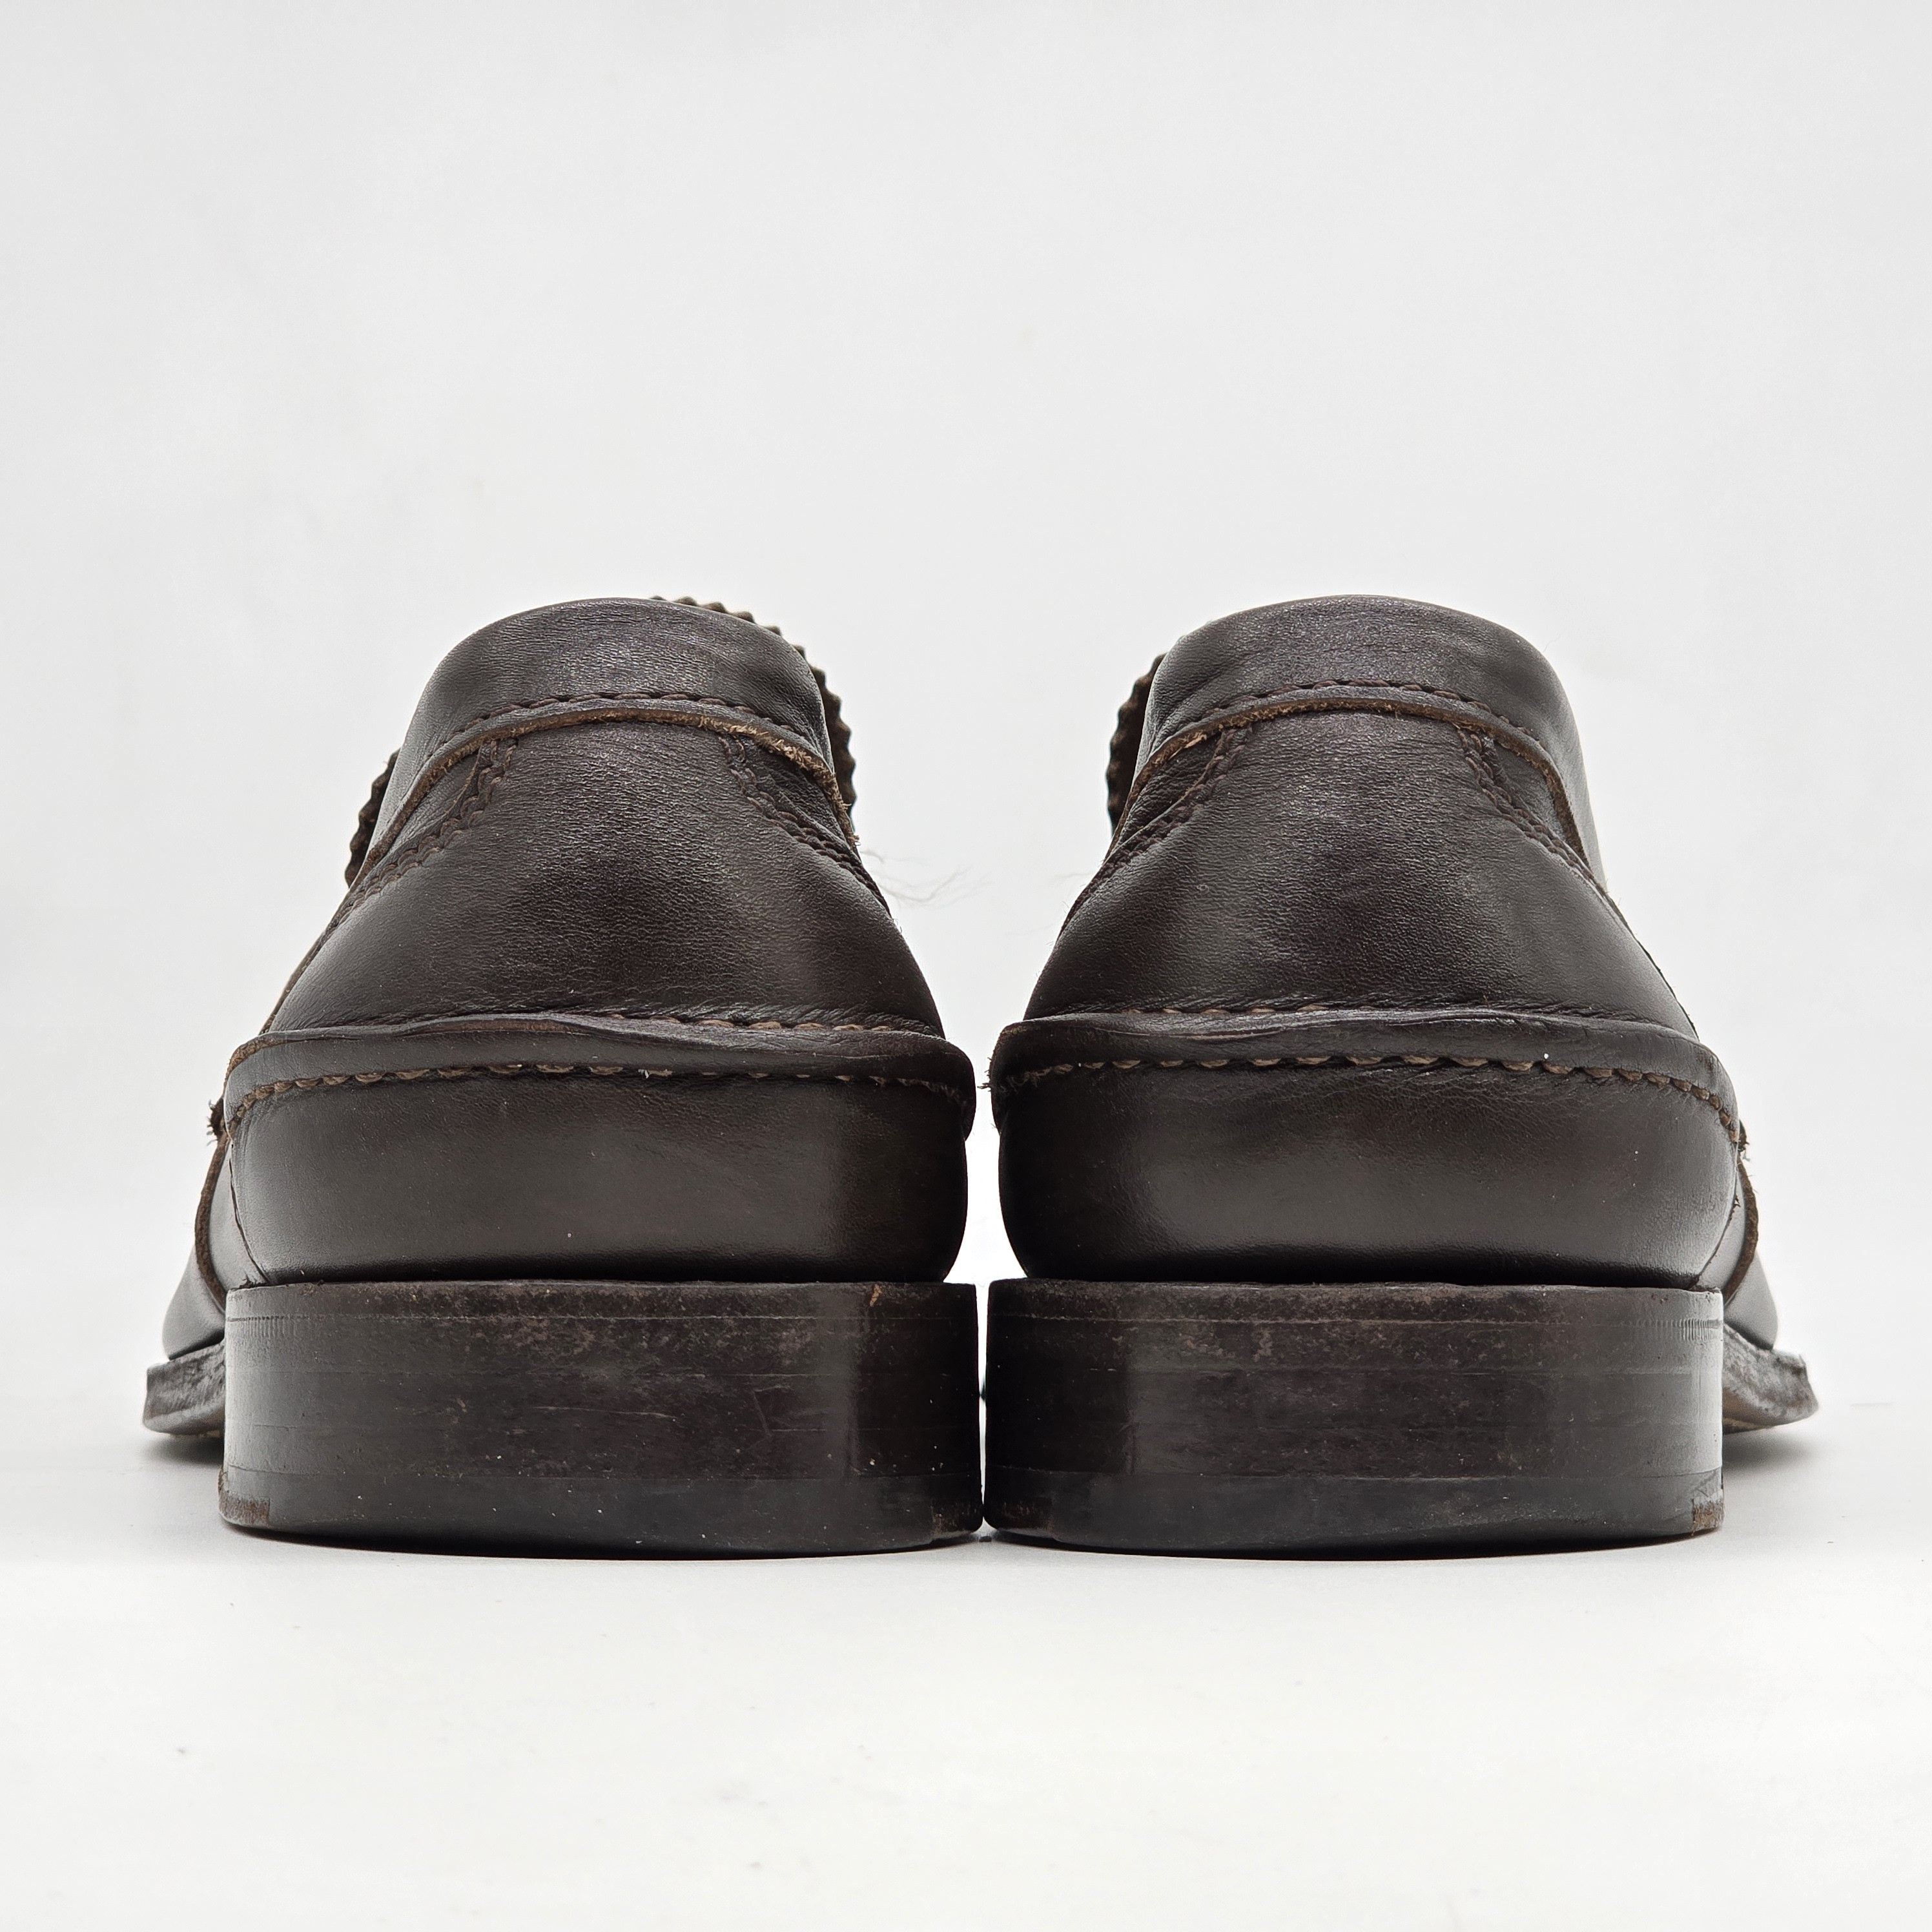 Churchs - Pembrey Leather Loafers - 7